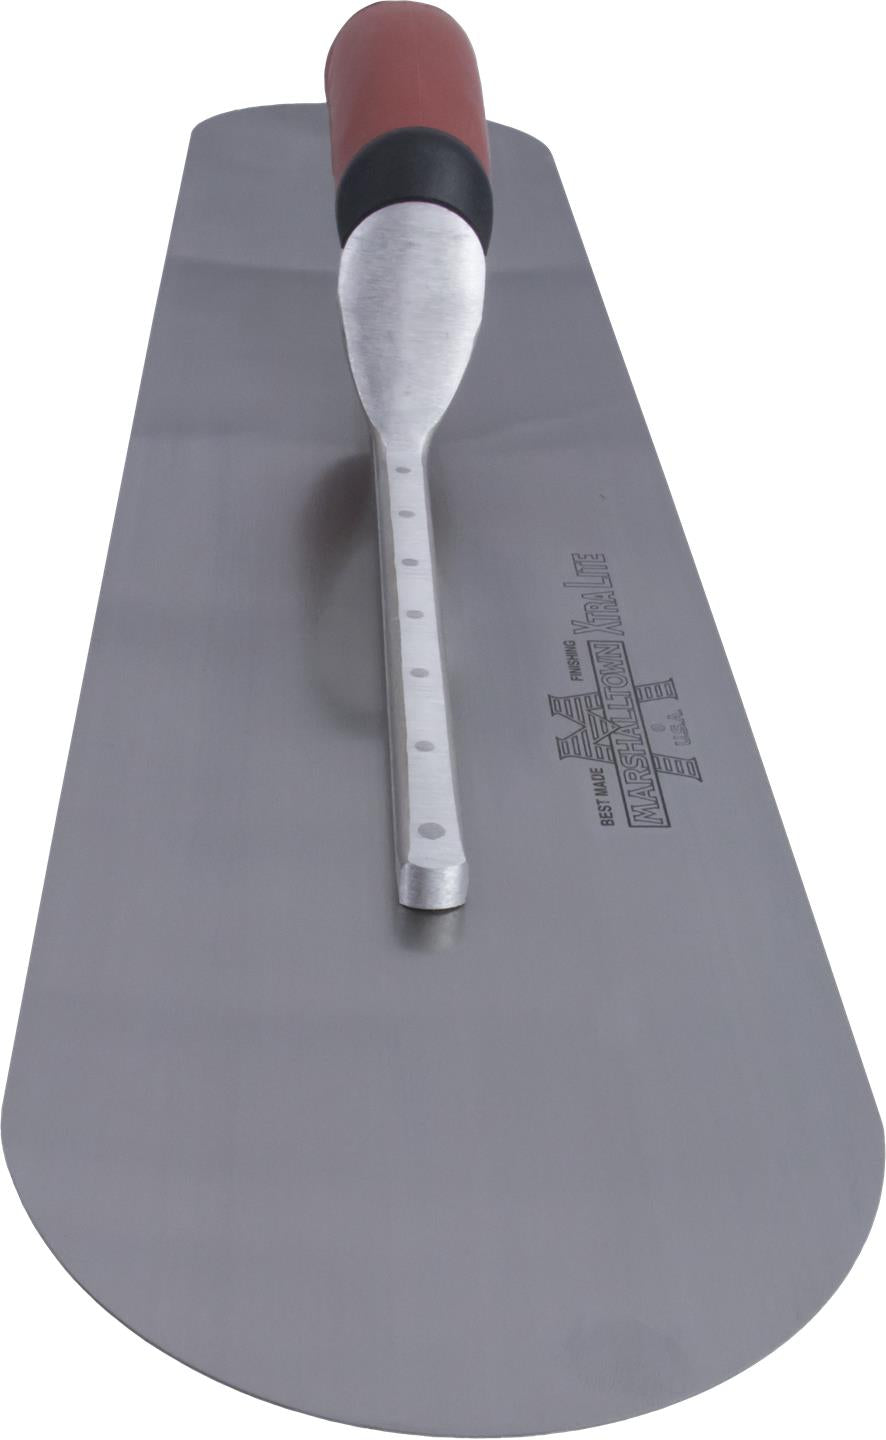 Marshalltown 12229 Concrete 24 X 4 Finishing Trowel-Fully Rounded Curved DuraSoft Handle